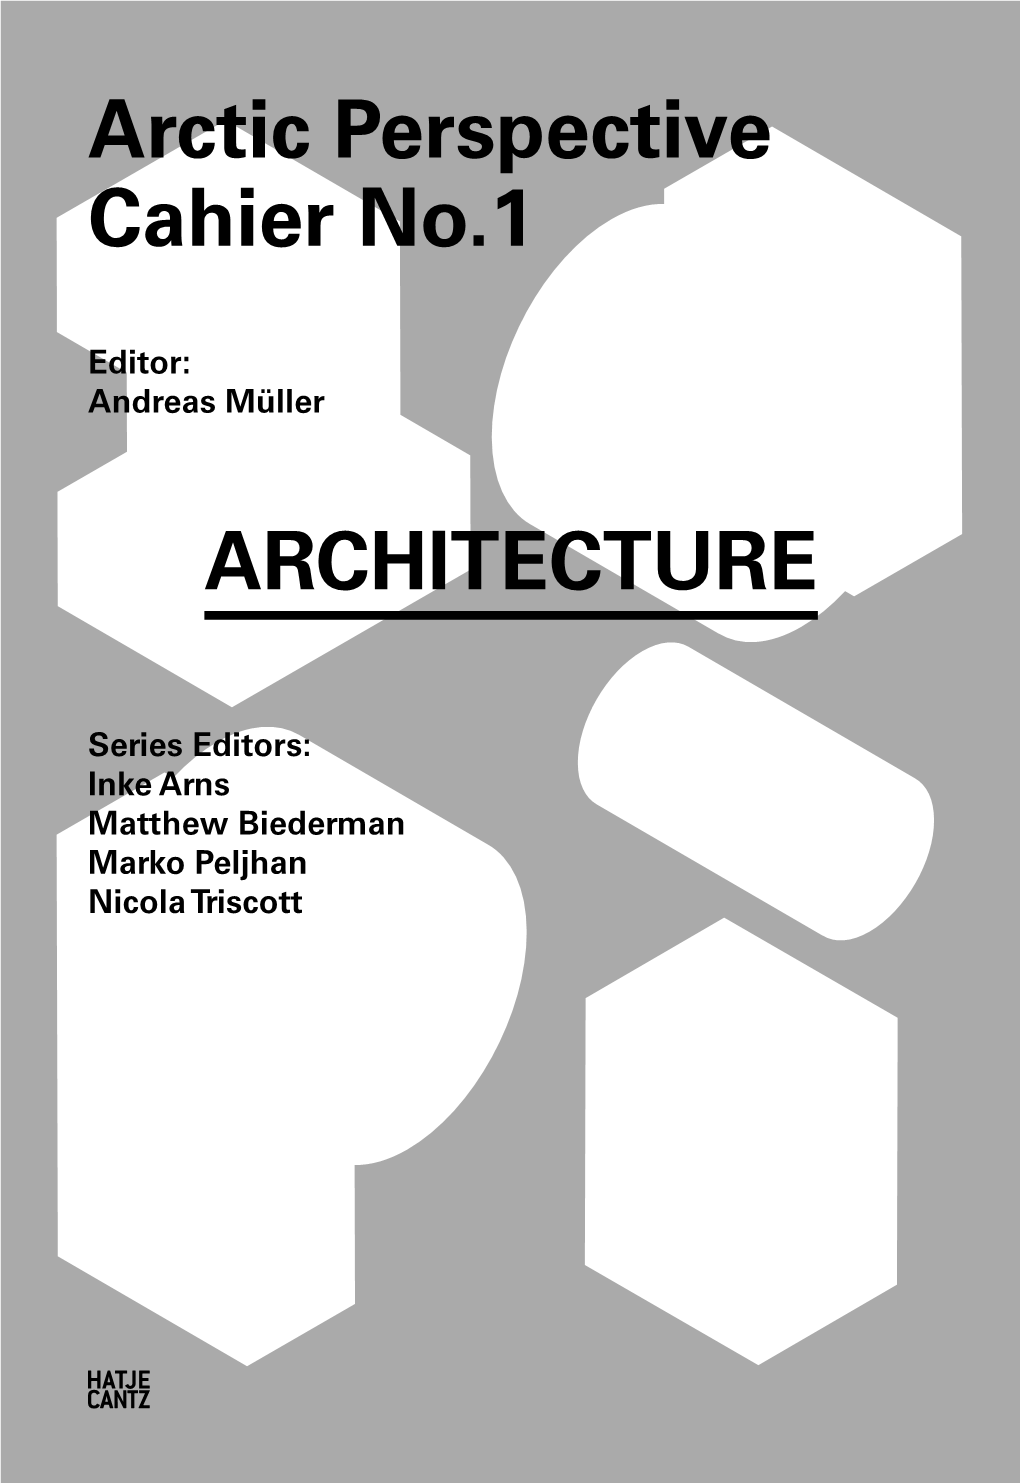 ARCHITECTURE 3 Arctic Perspective Cahier No.1